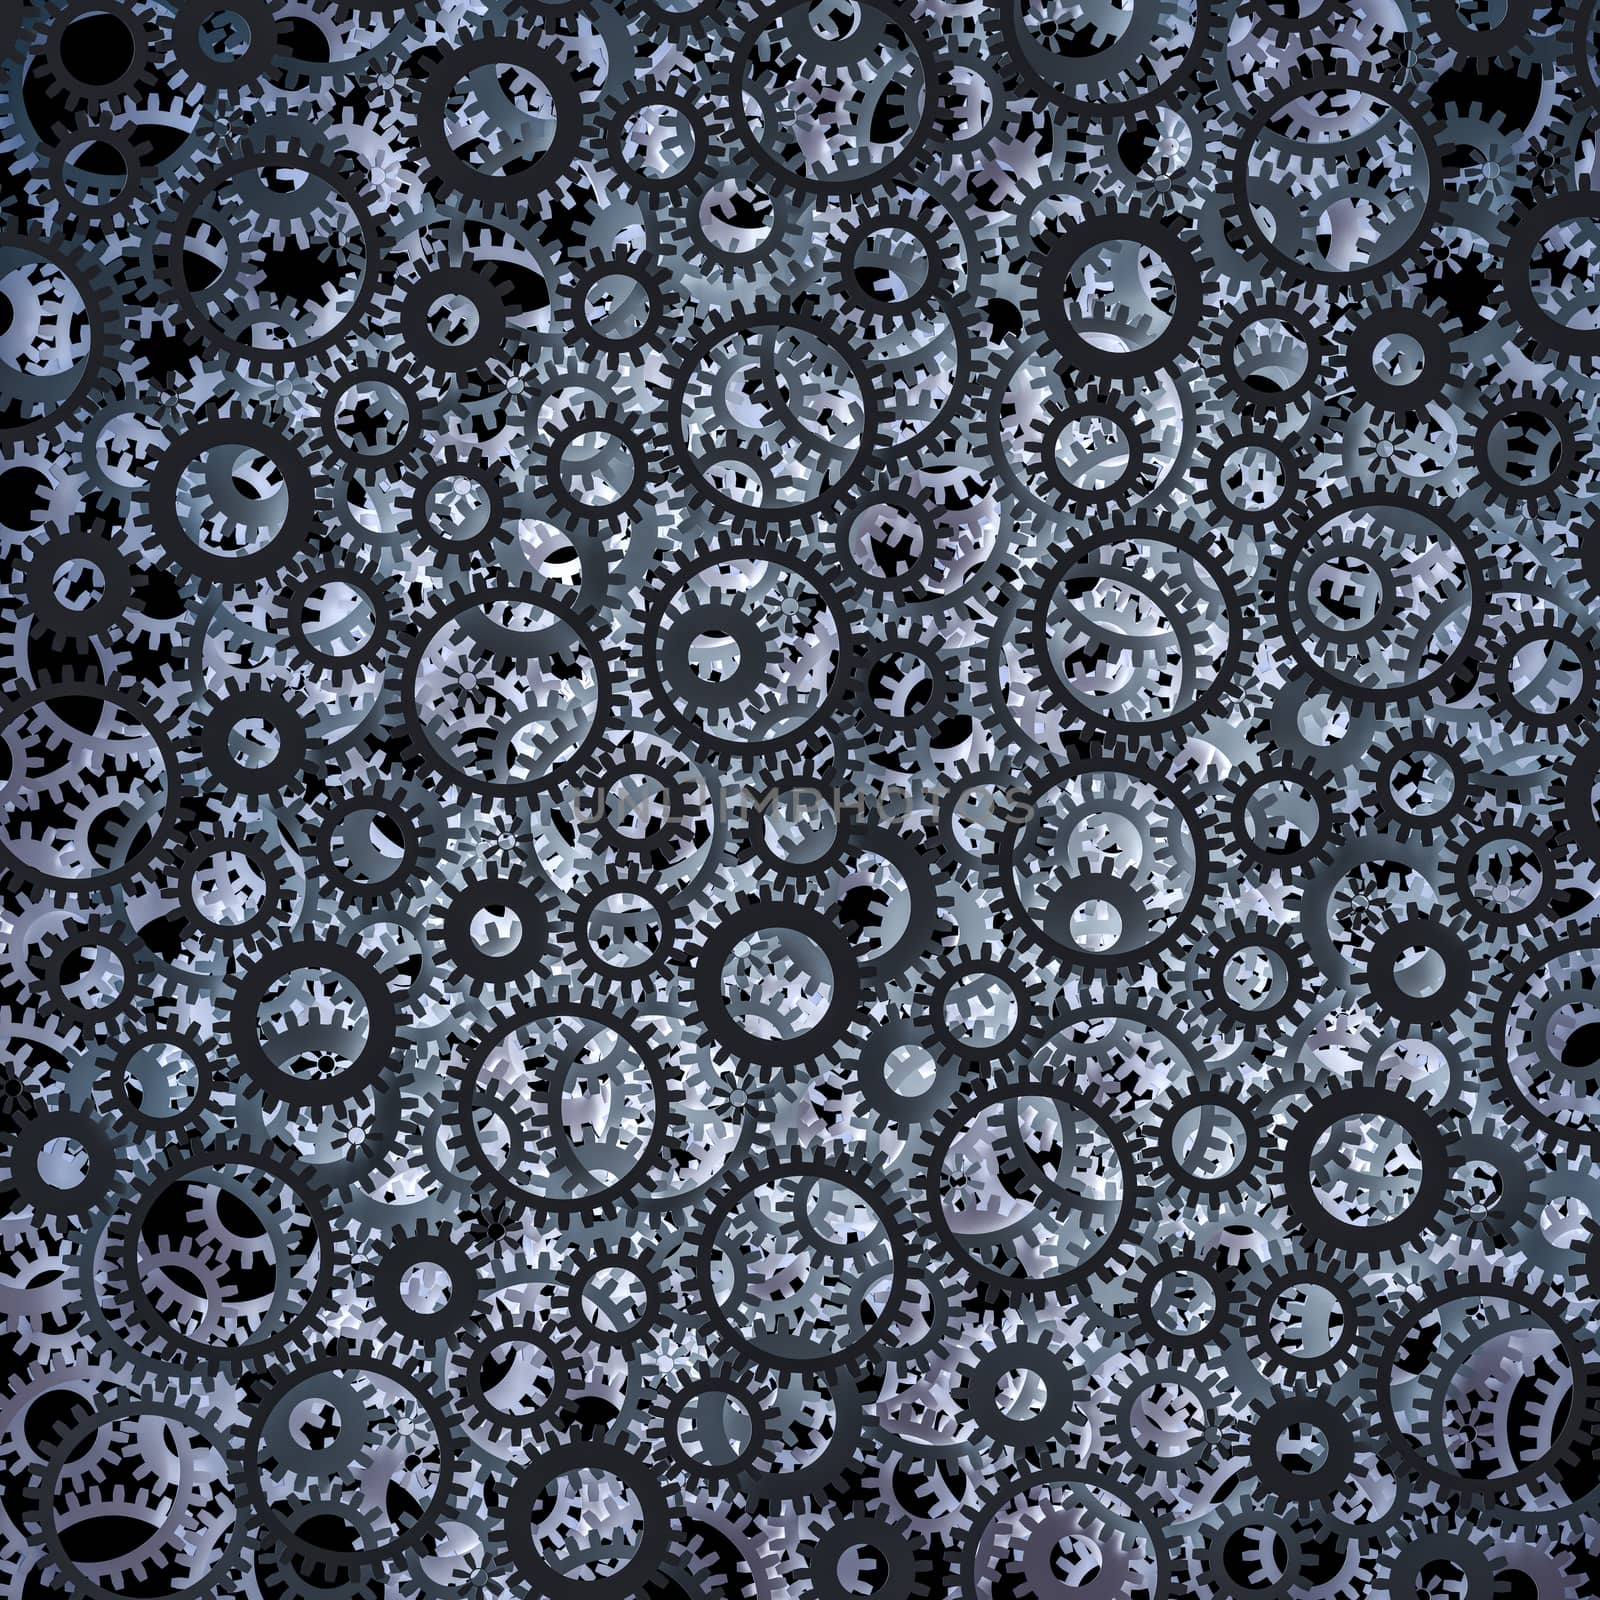 Gears and cogs. Black toned background. 3d illustration